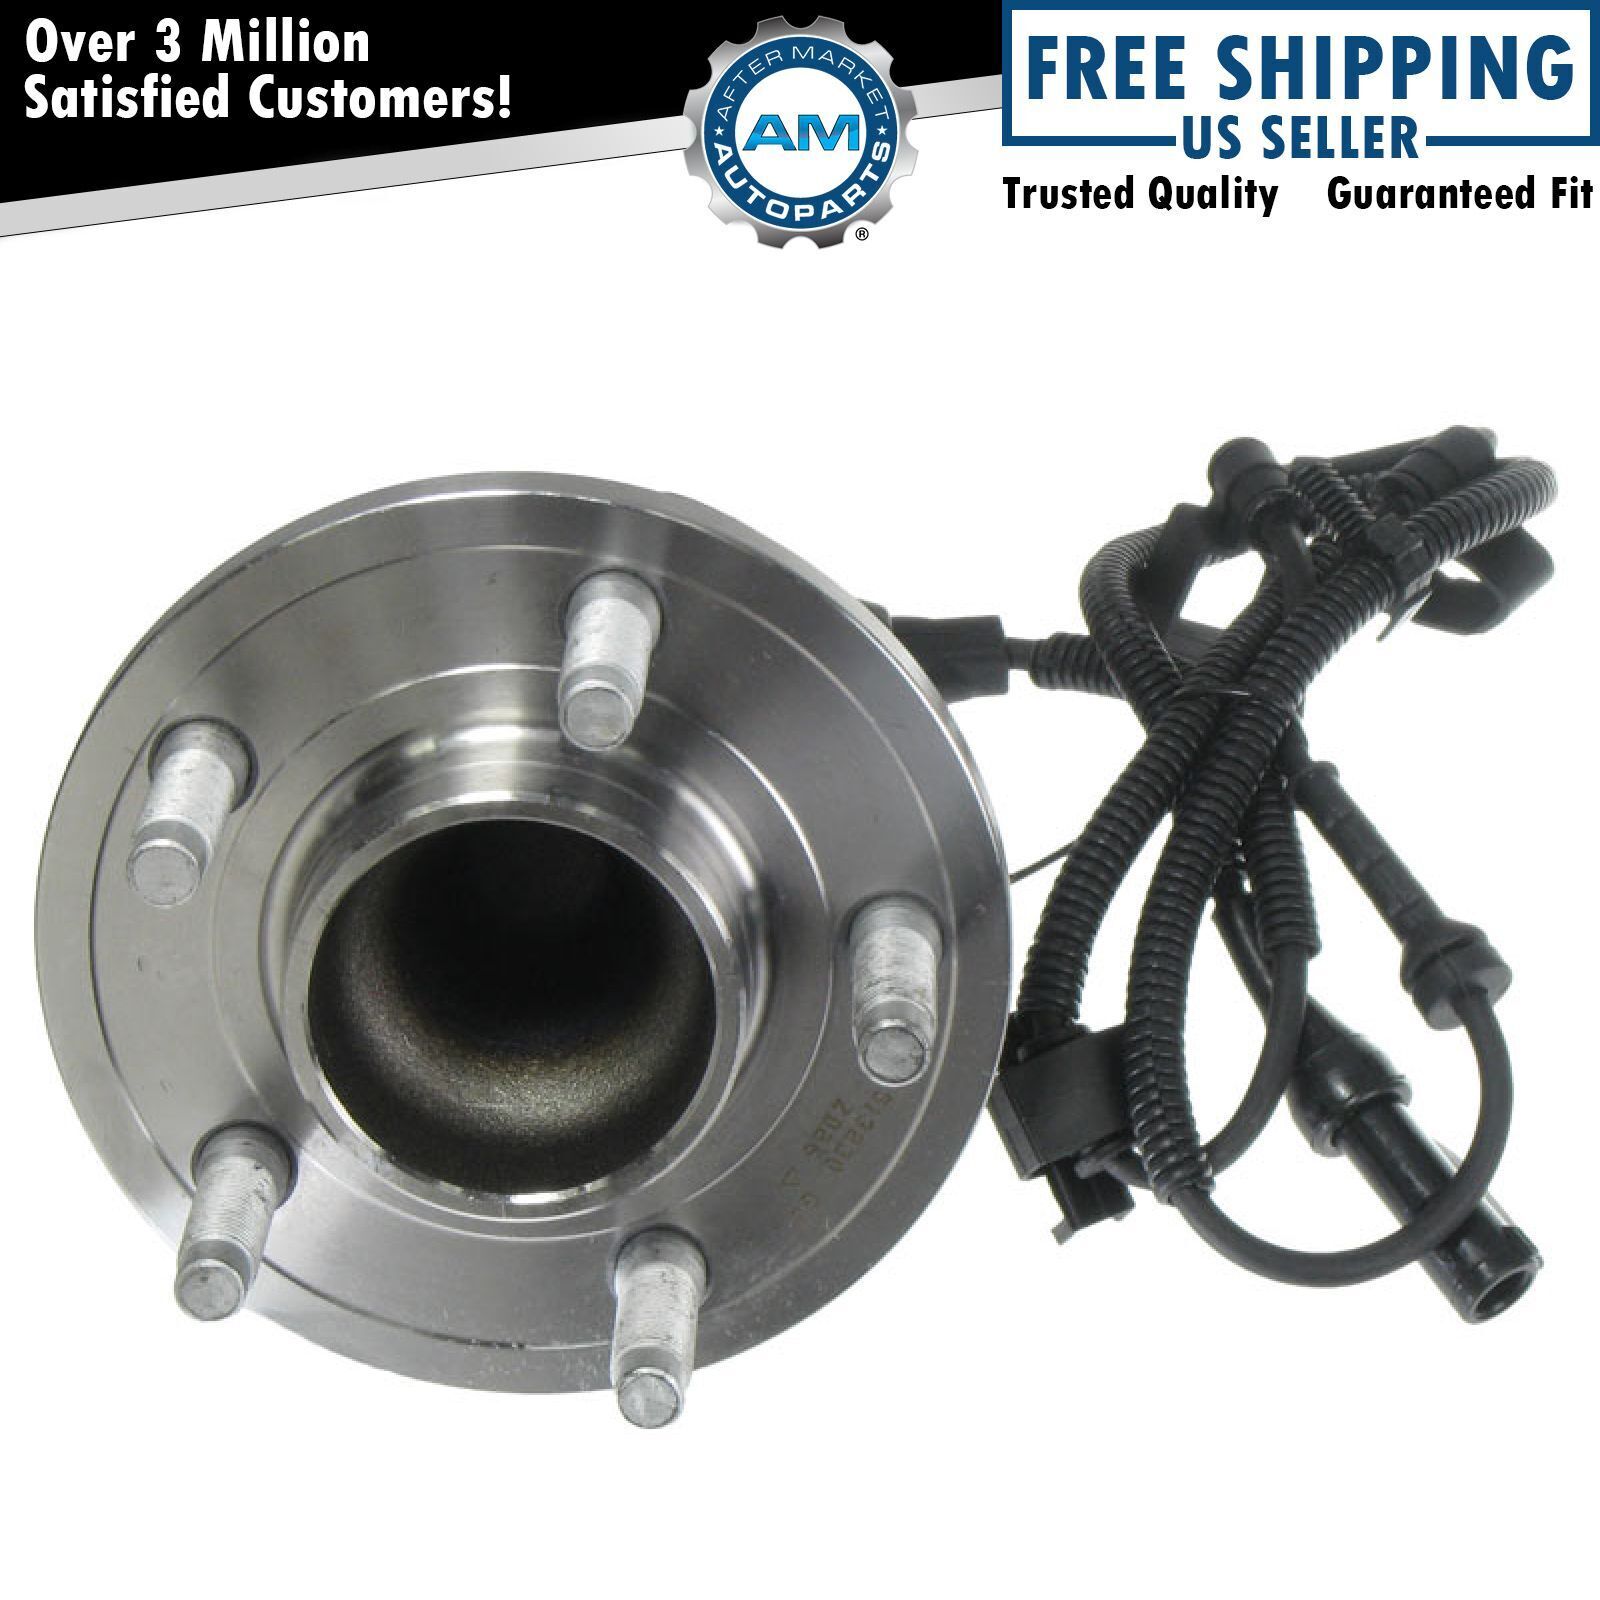 Wheel Hub & Bearing Front for Ford Crown Victoria Lincoln Town Car Mercury